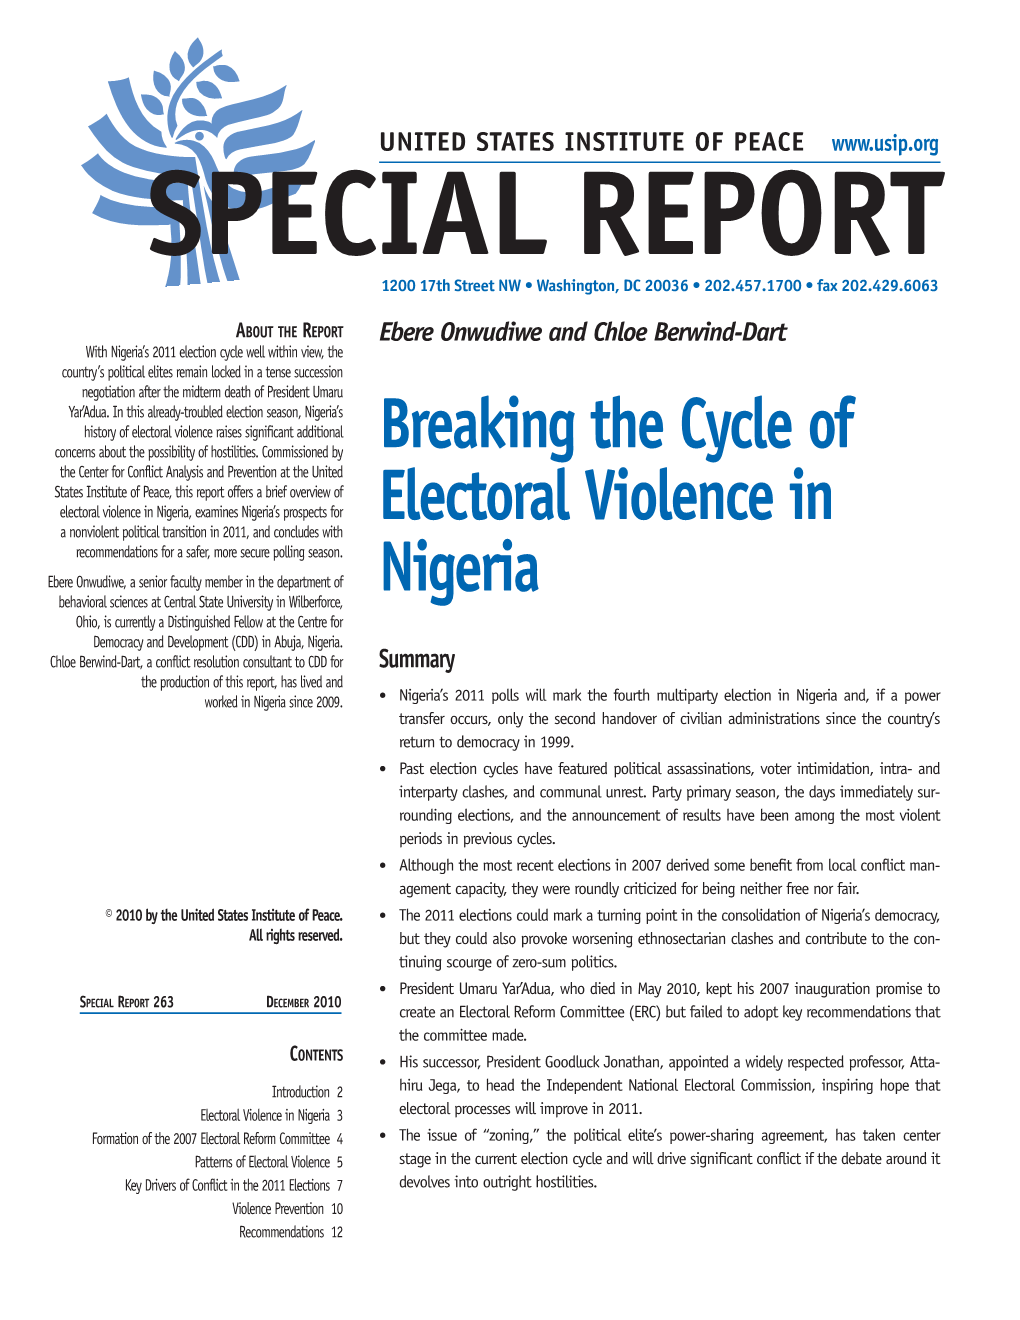 Breaking the Cycle of Electoral Violence in Nigeria